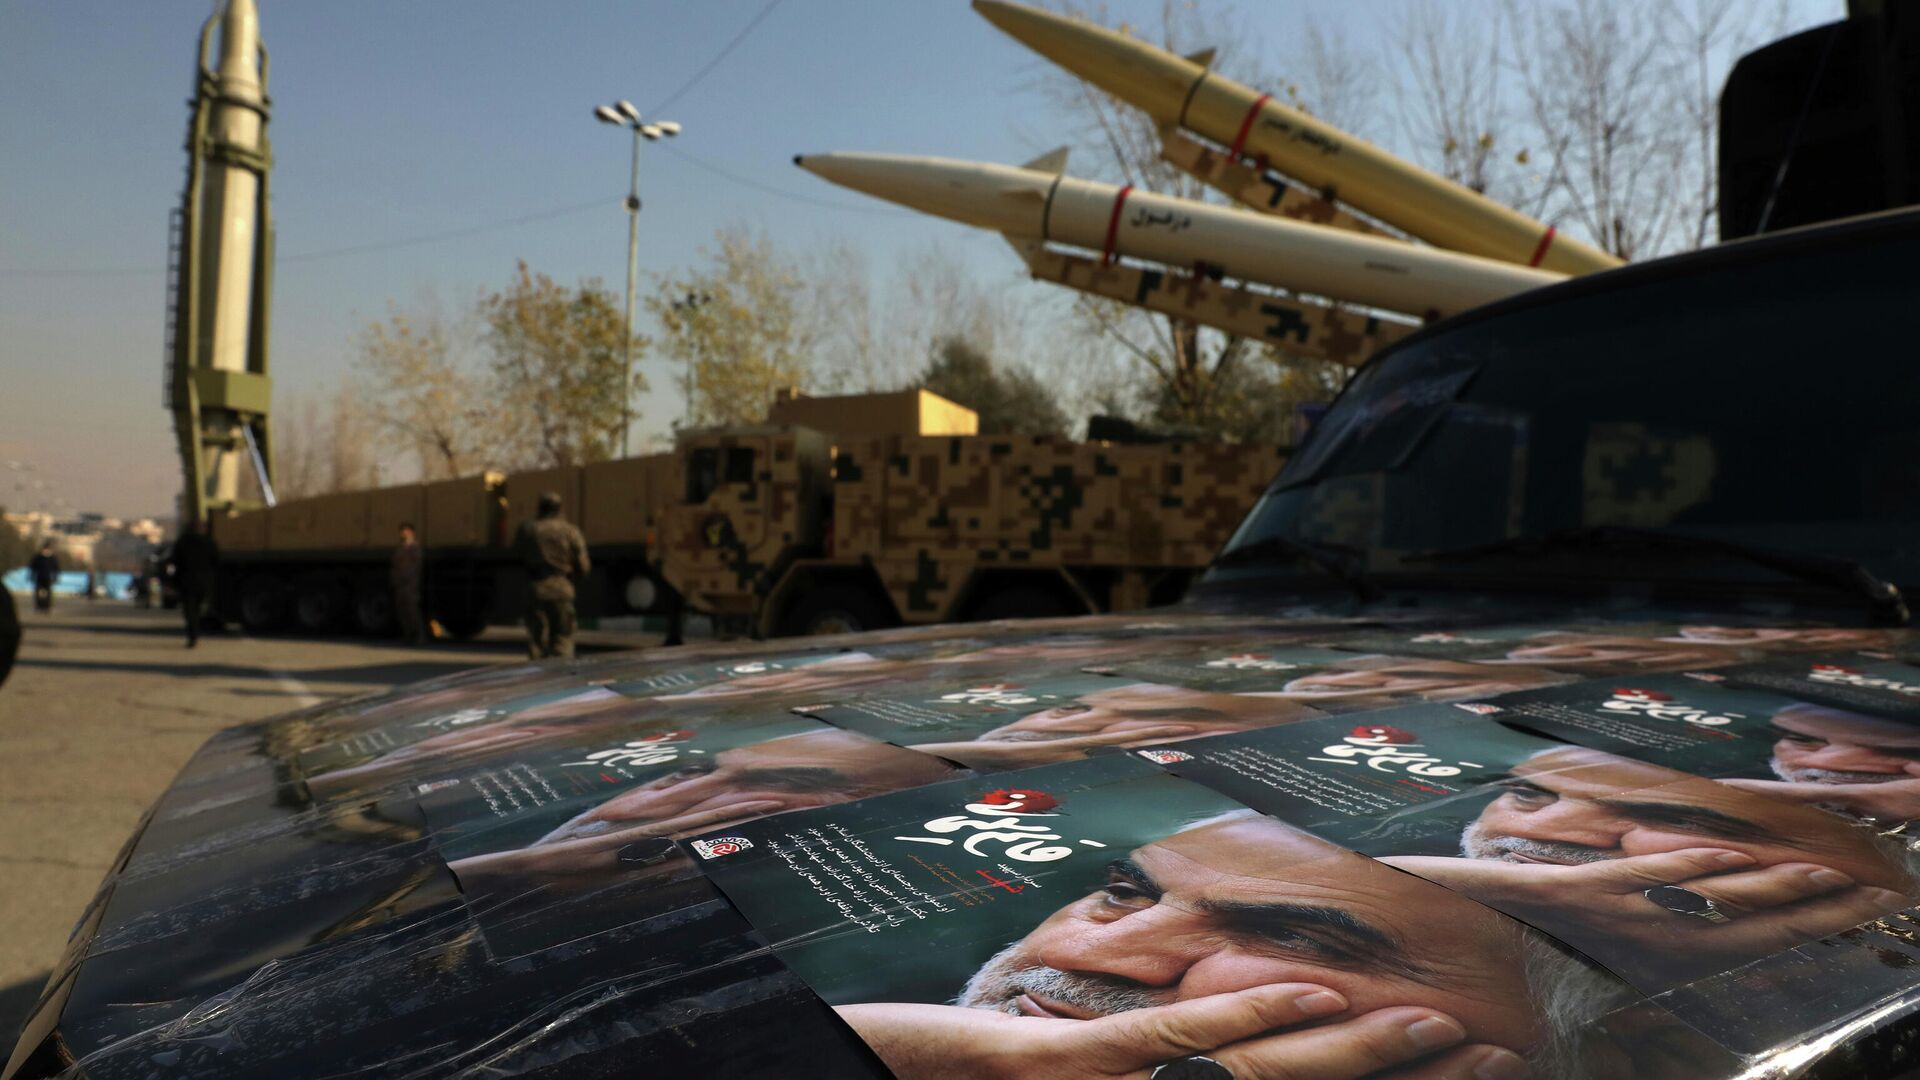 Posters of Iranian Gen. Qassem Soleimani, who was killed in Iraq in a U.S. drone attack in Jan. 3, 2020, are seen in front of Qiam, background left, Zolfaghar, top right, and Dezful missiles displayed in a missile capabilities exhibition by the paramilitary Revolutionary Guard a day prior to second anniversary of Iran's missile strike on U.S. bases in Iraq in retaliation for killing Gen. Soleimani, at Imam Khomeini grand mosque, in Tehran, Iran, Friday, Jan. 7, 2022. Iran put three ballistic missiles on display on Friday, as talks in Vienna aimed at reviving Tehran's nuclear deal with world powers flounder.  - Sputnik International, 1920, 14.02.2022